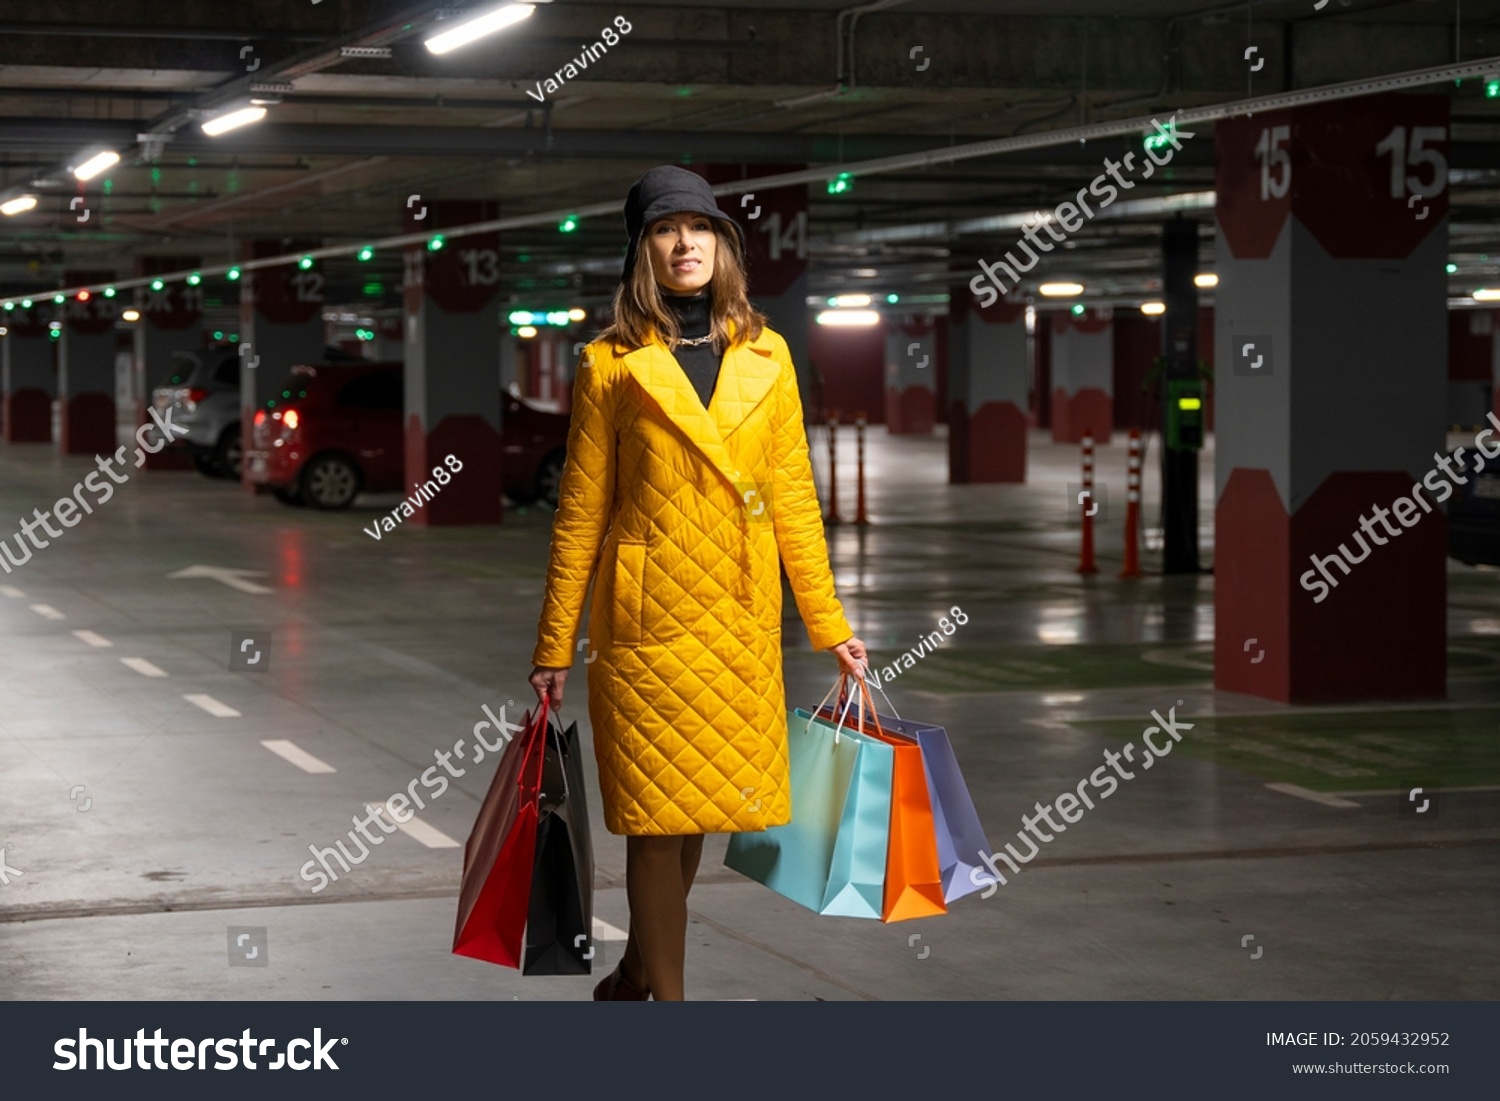 Shopper woman with purchases walking on the parking lot of shopping center. #2059432952